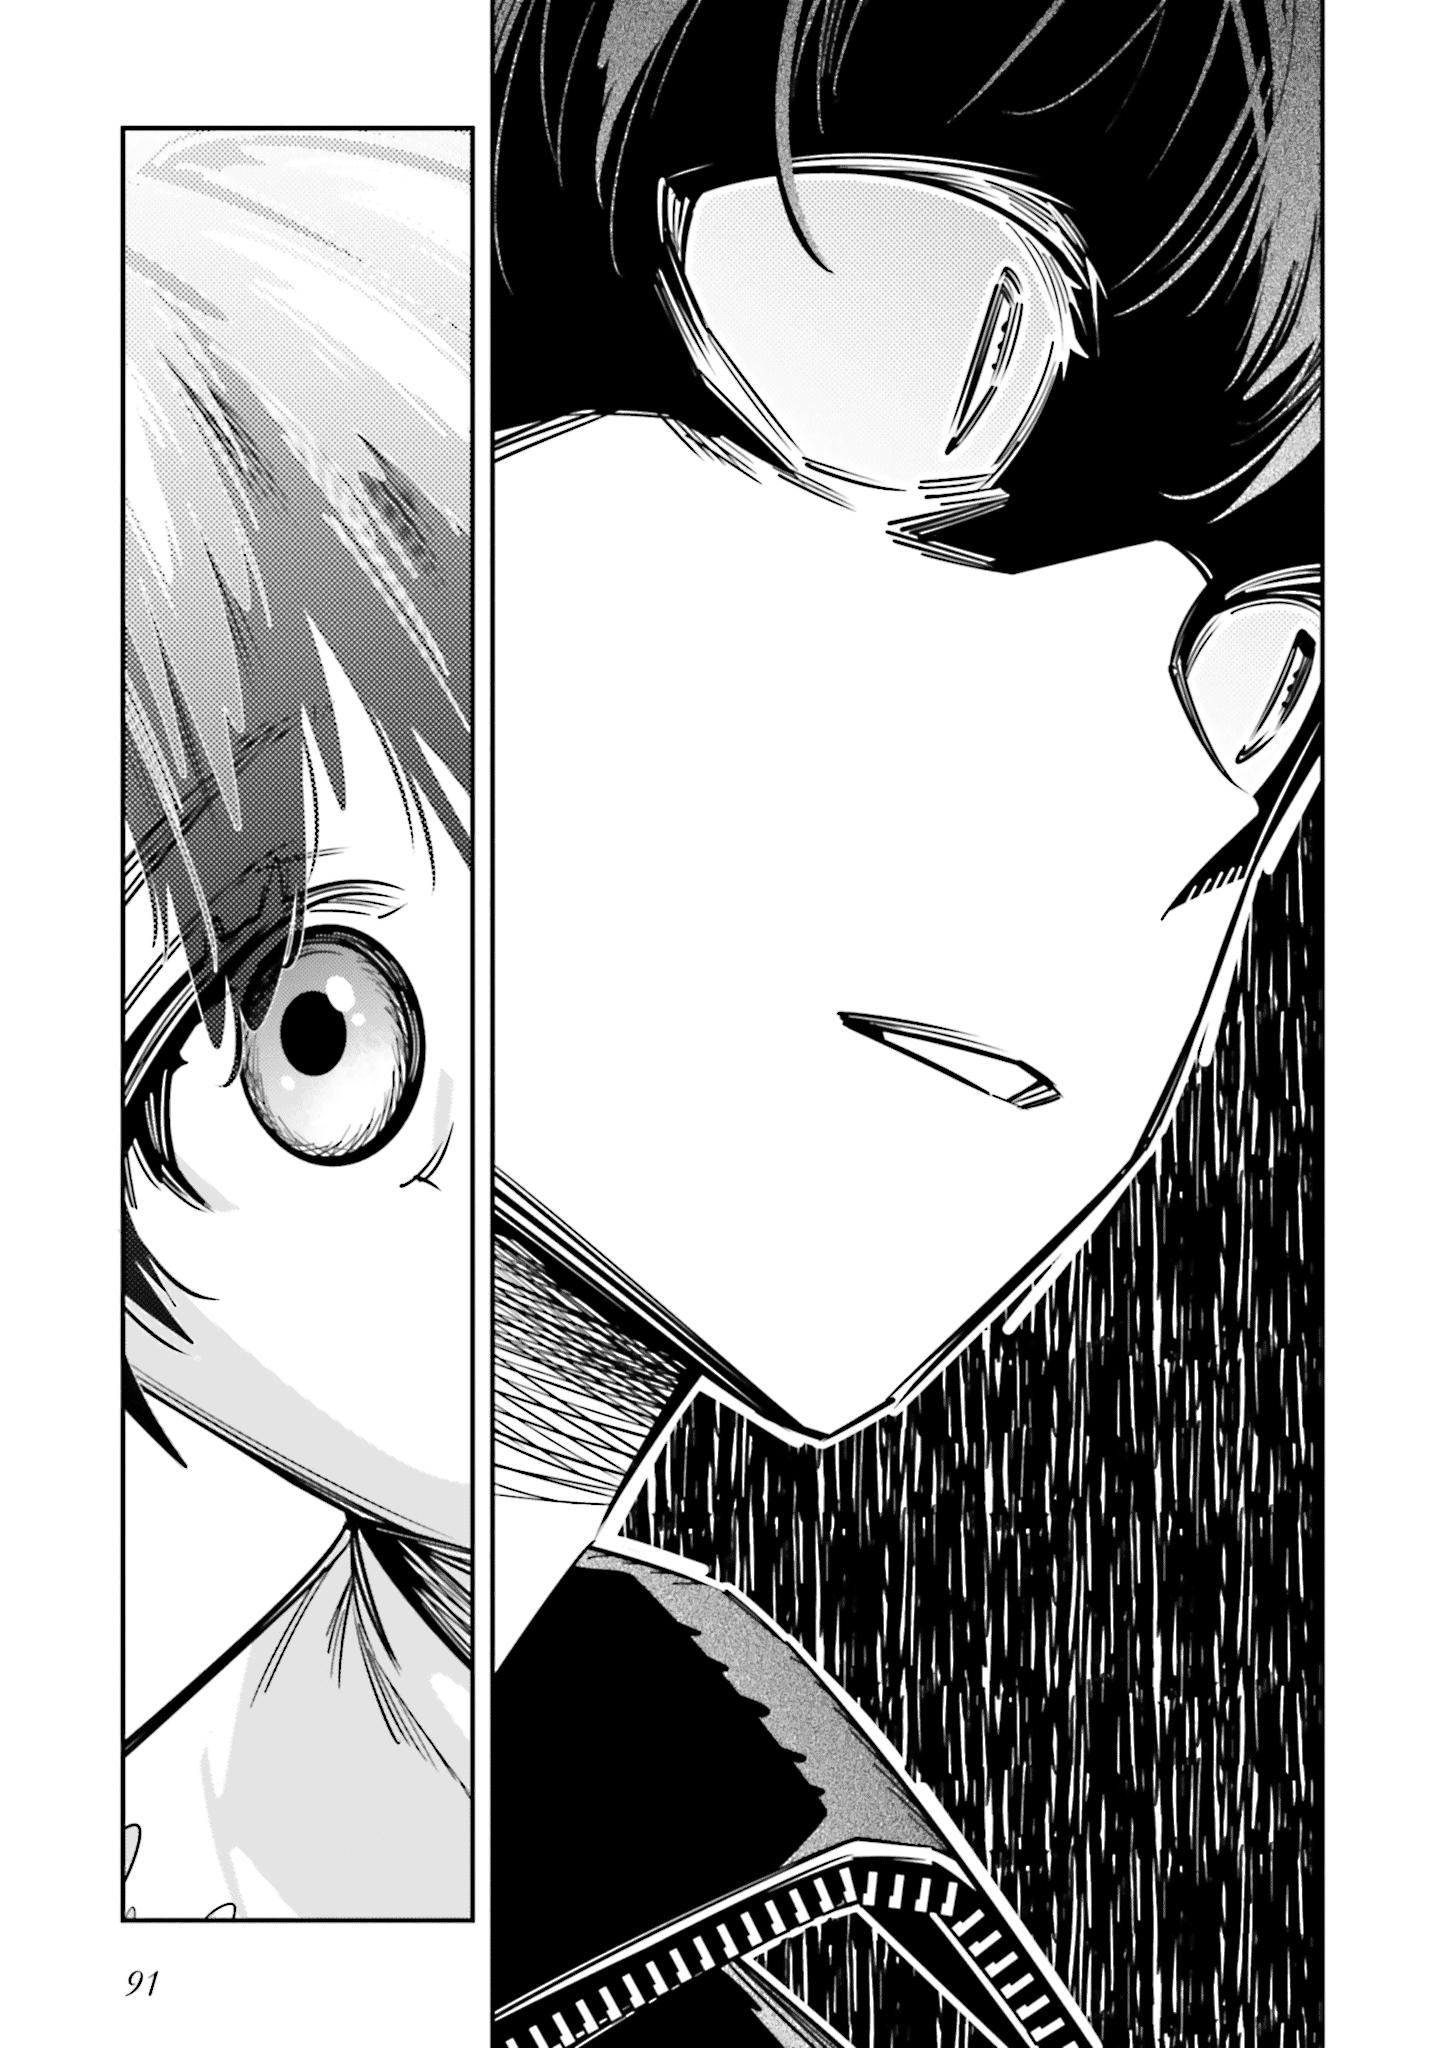 I Reincarnated As The Little Sister Of A Death Game Manga's Murder Mastermind And Failed Chapter 7 #21